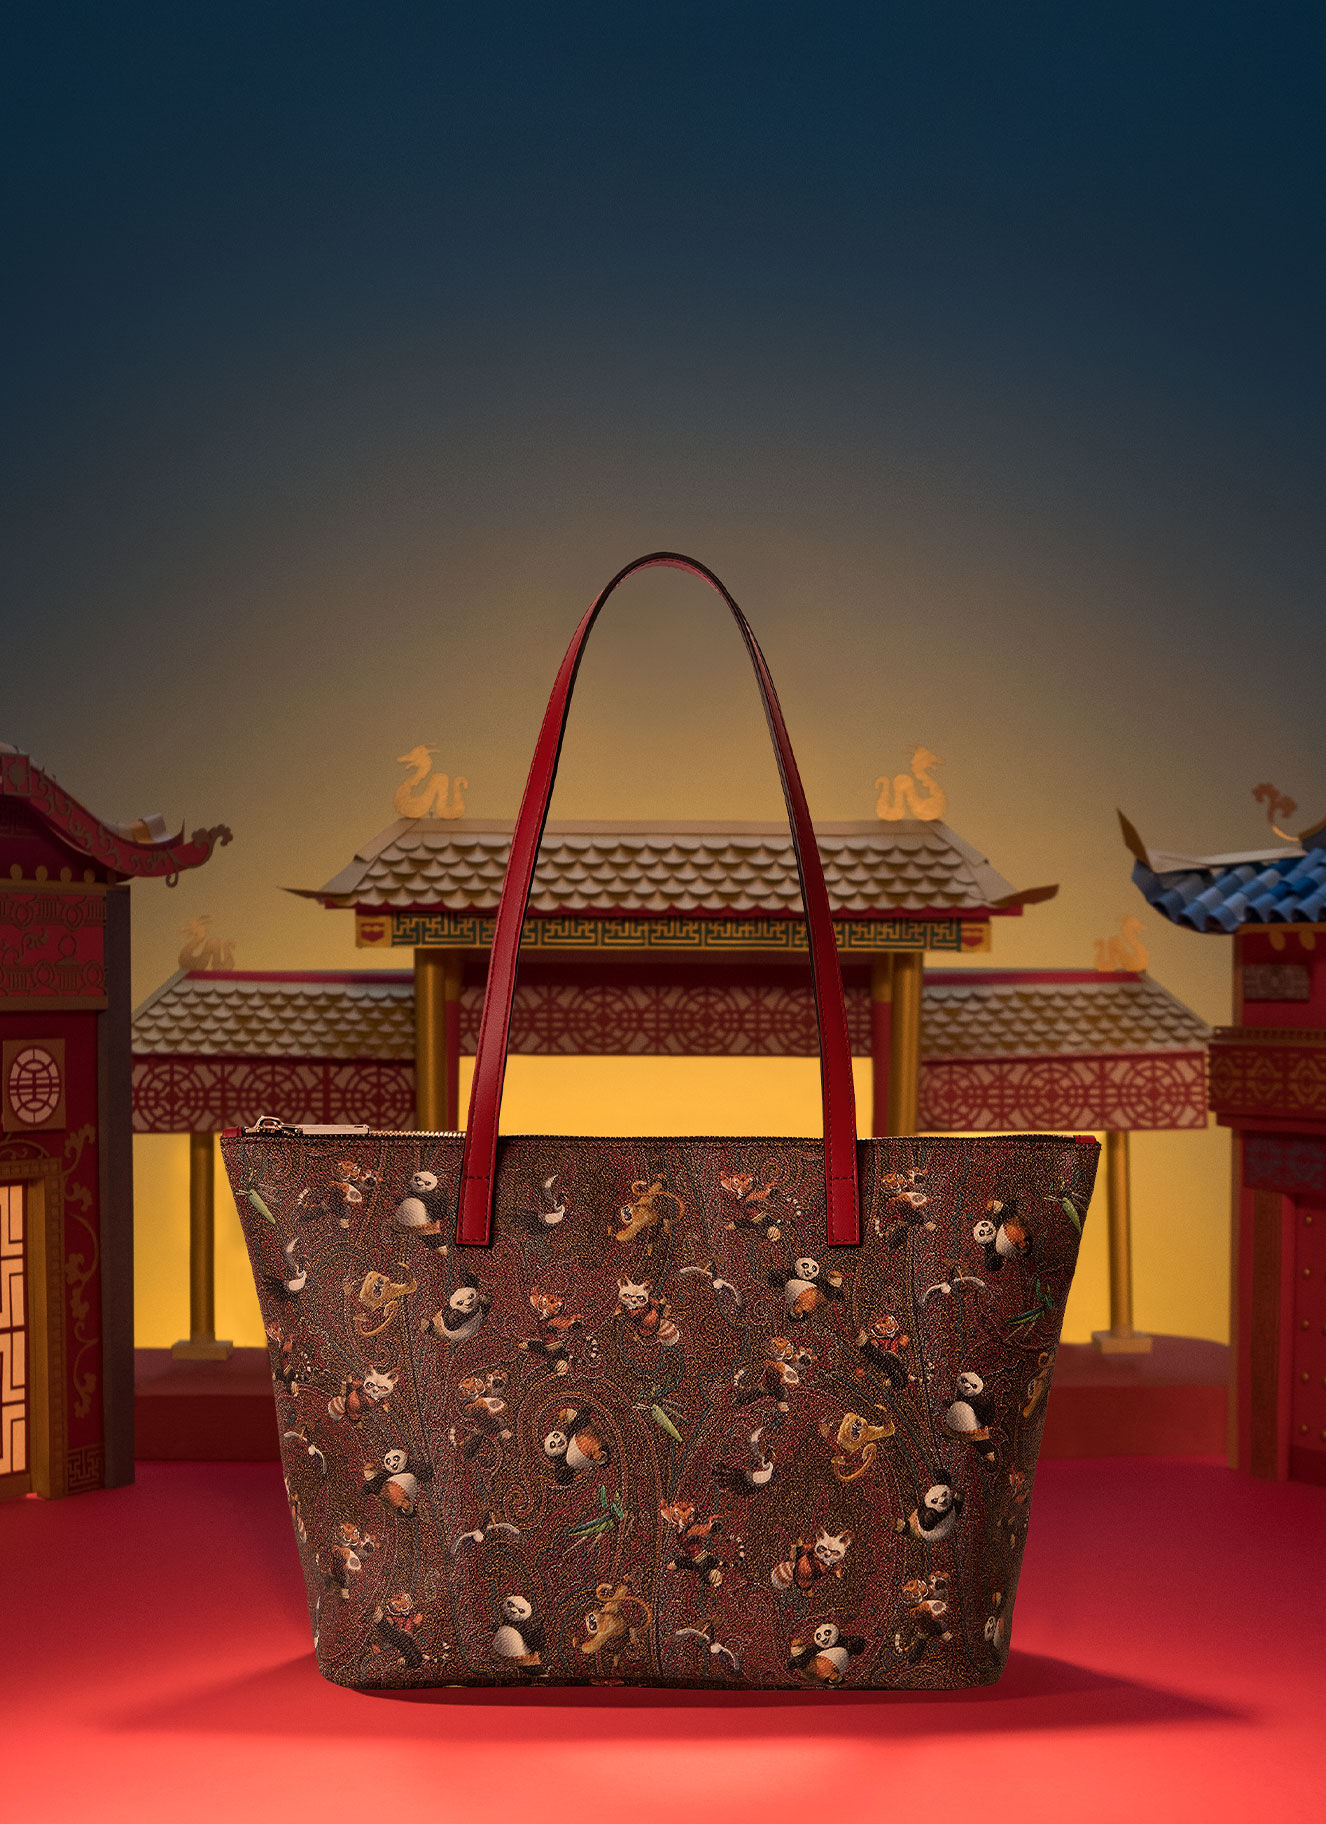 KUNG FU PANDA Collection: Shirts, bags, accessories | ETRO